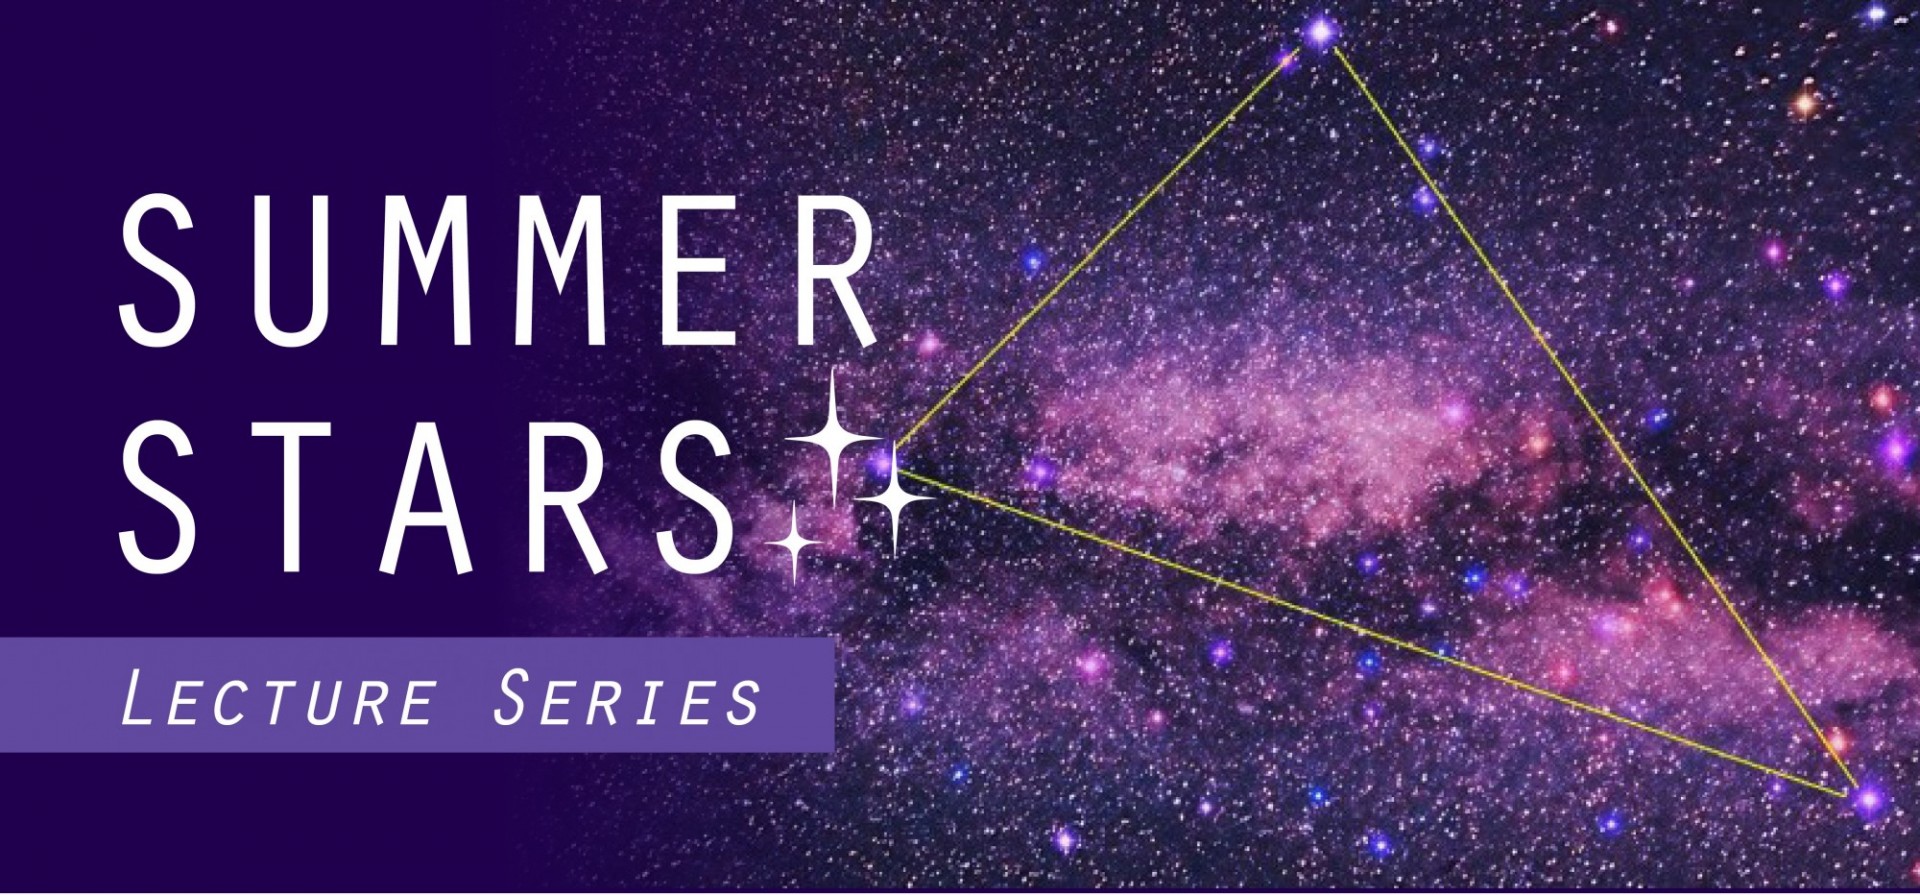 Lamont-Doherty Summer Stars Lecture Series